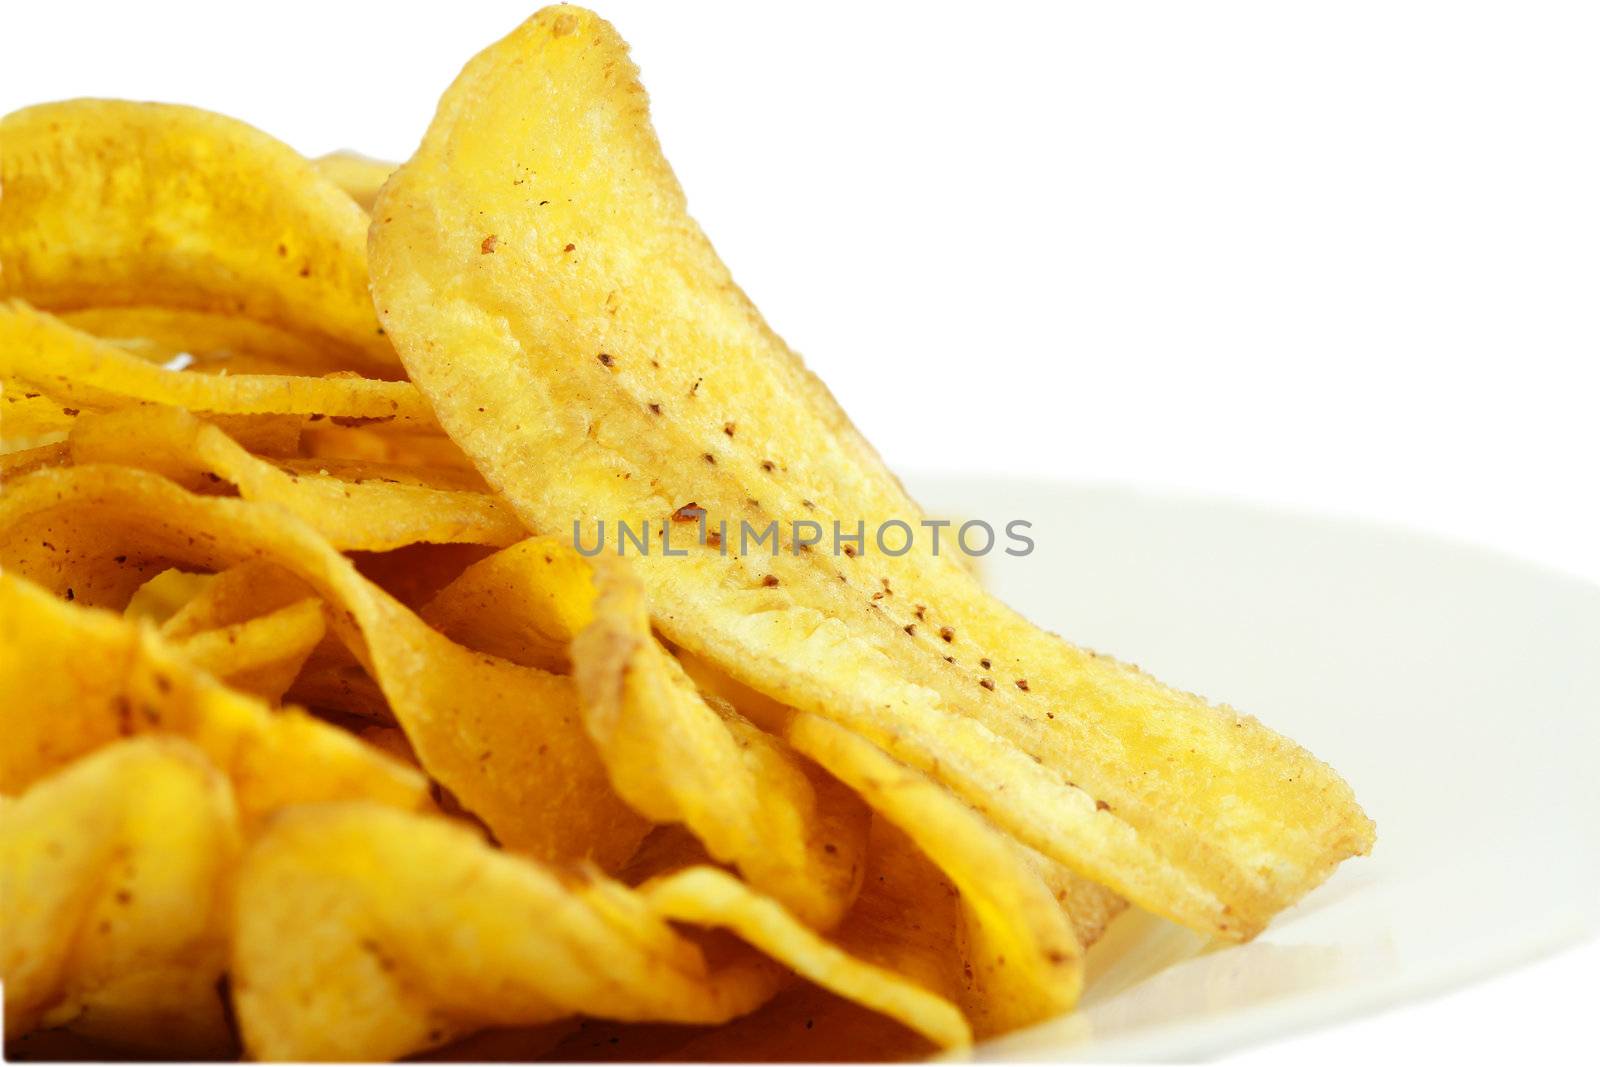 Fried thinly sliced banana chips, a tropical snack